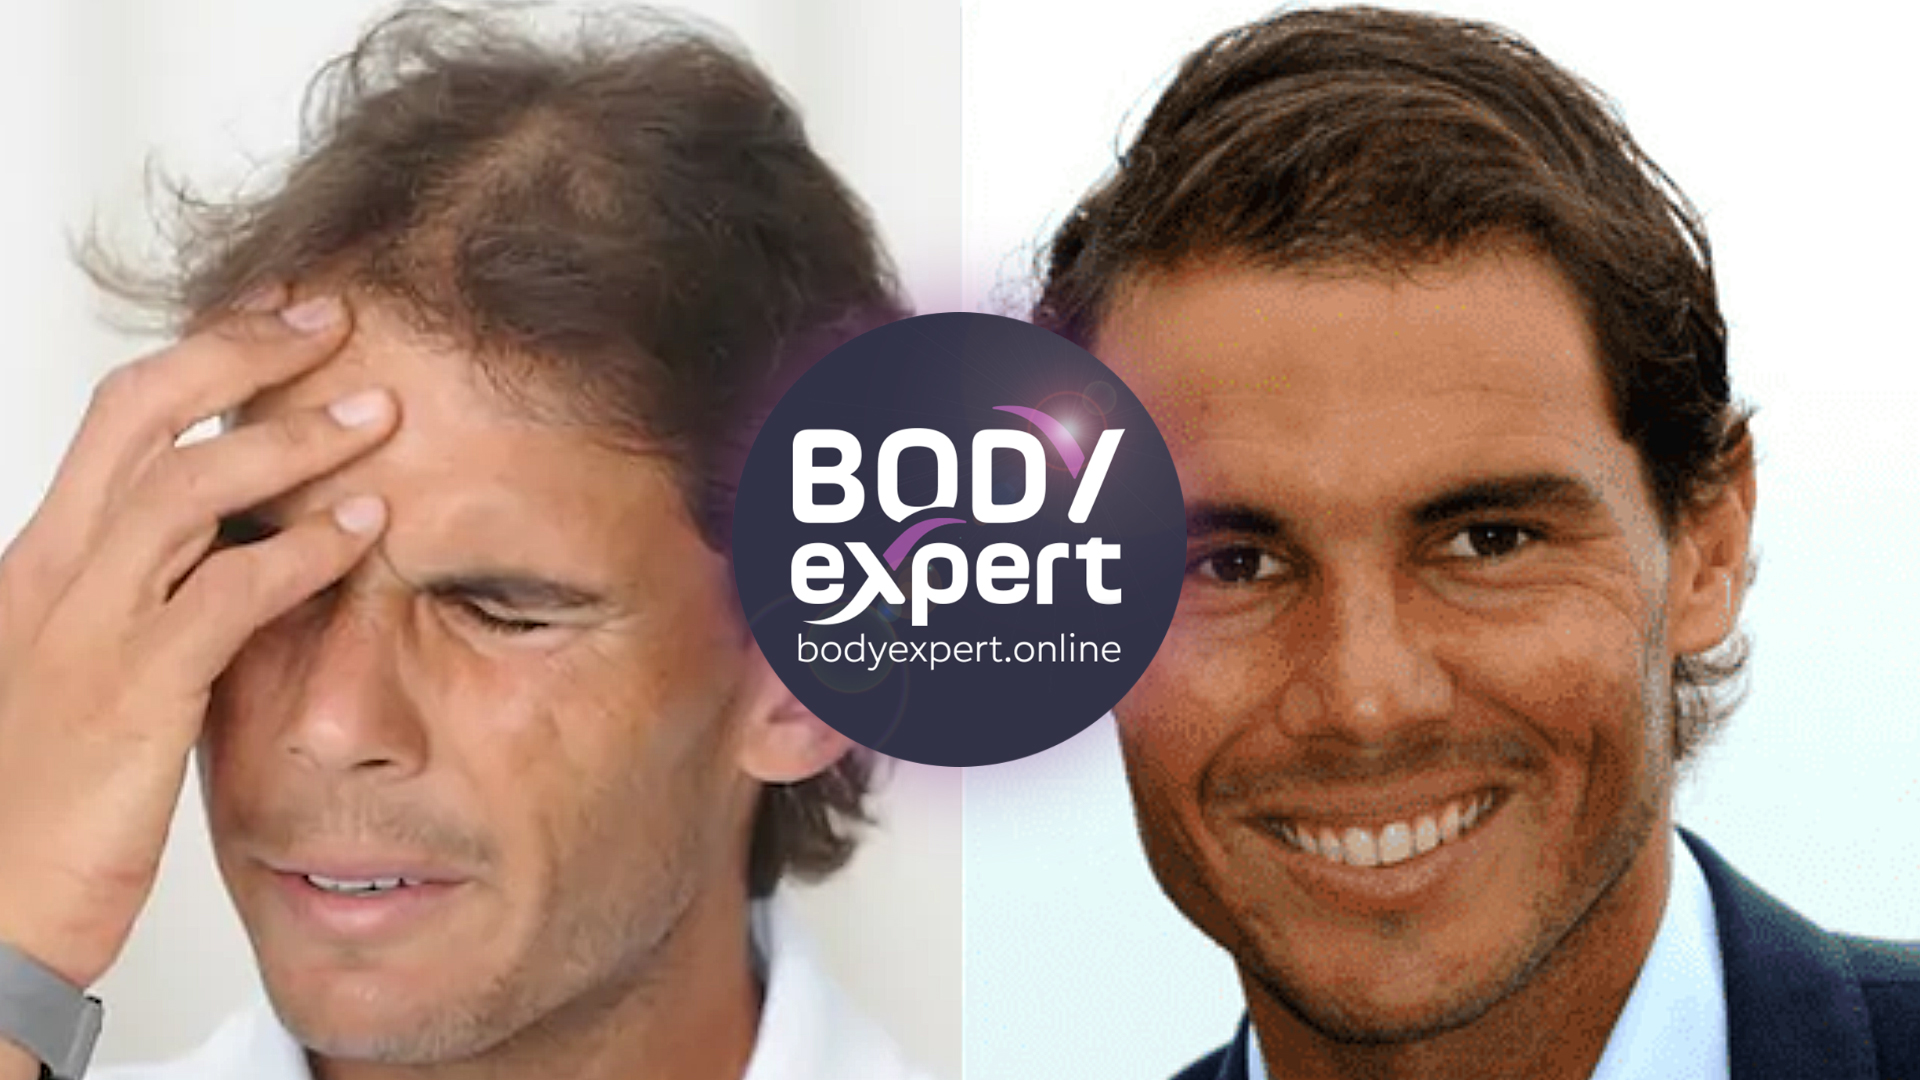 Hair Transplant For Thinning Hair, Difference Between Loss & Thinning